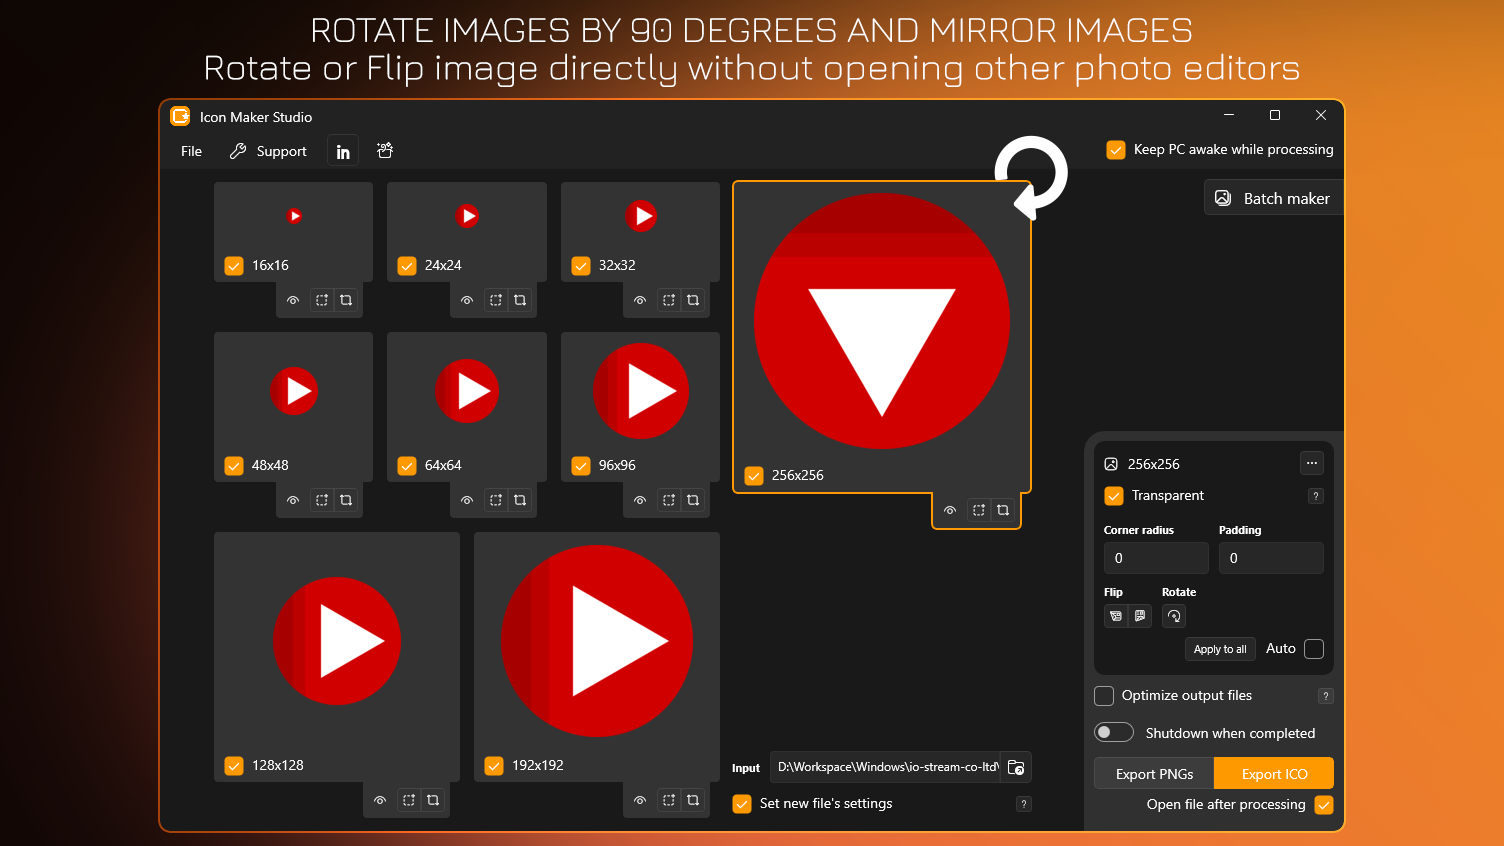 Rotate Images By 90 Degrees and Mirror Images - Rotate or Flip image directly without opening other photo editors